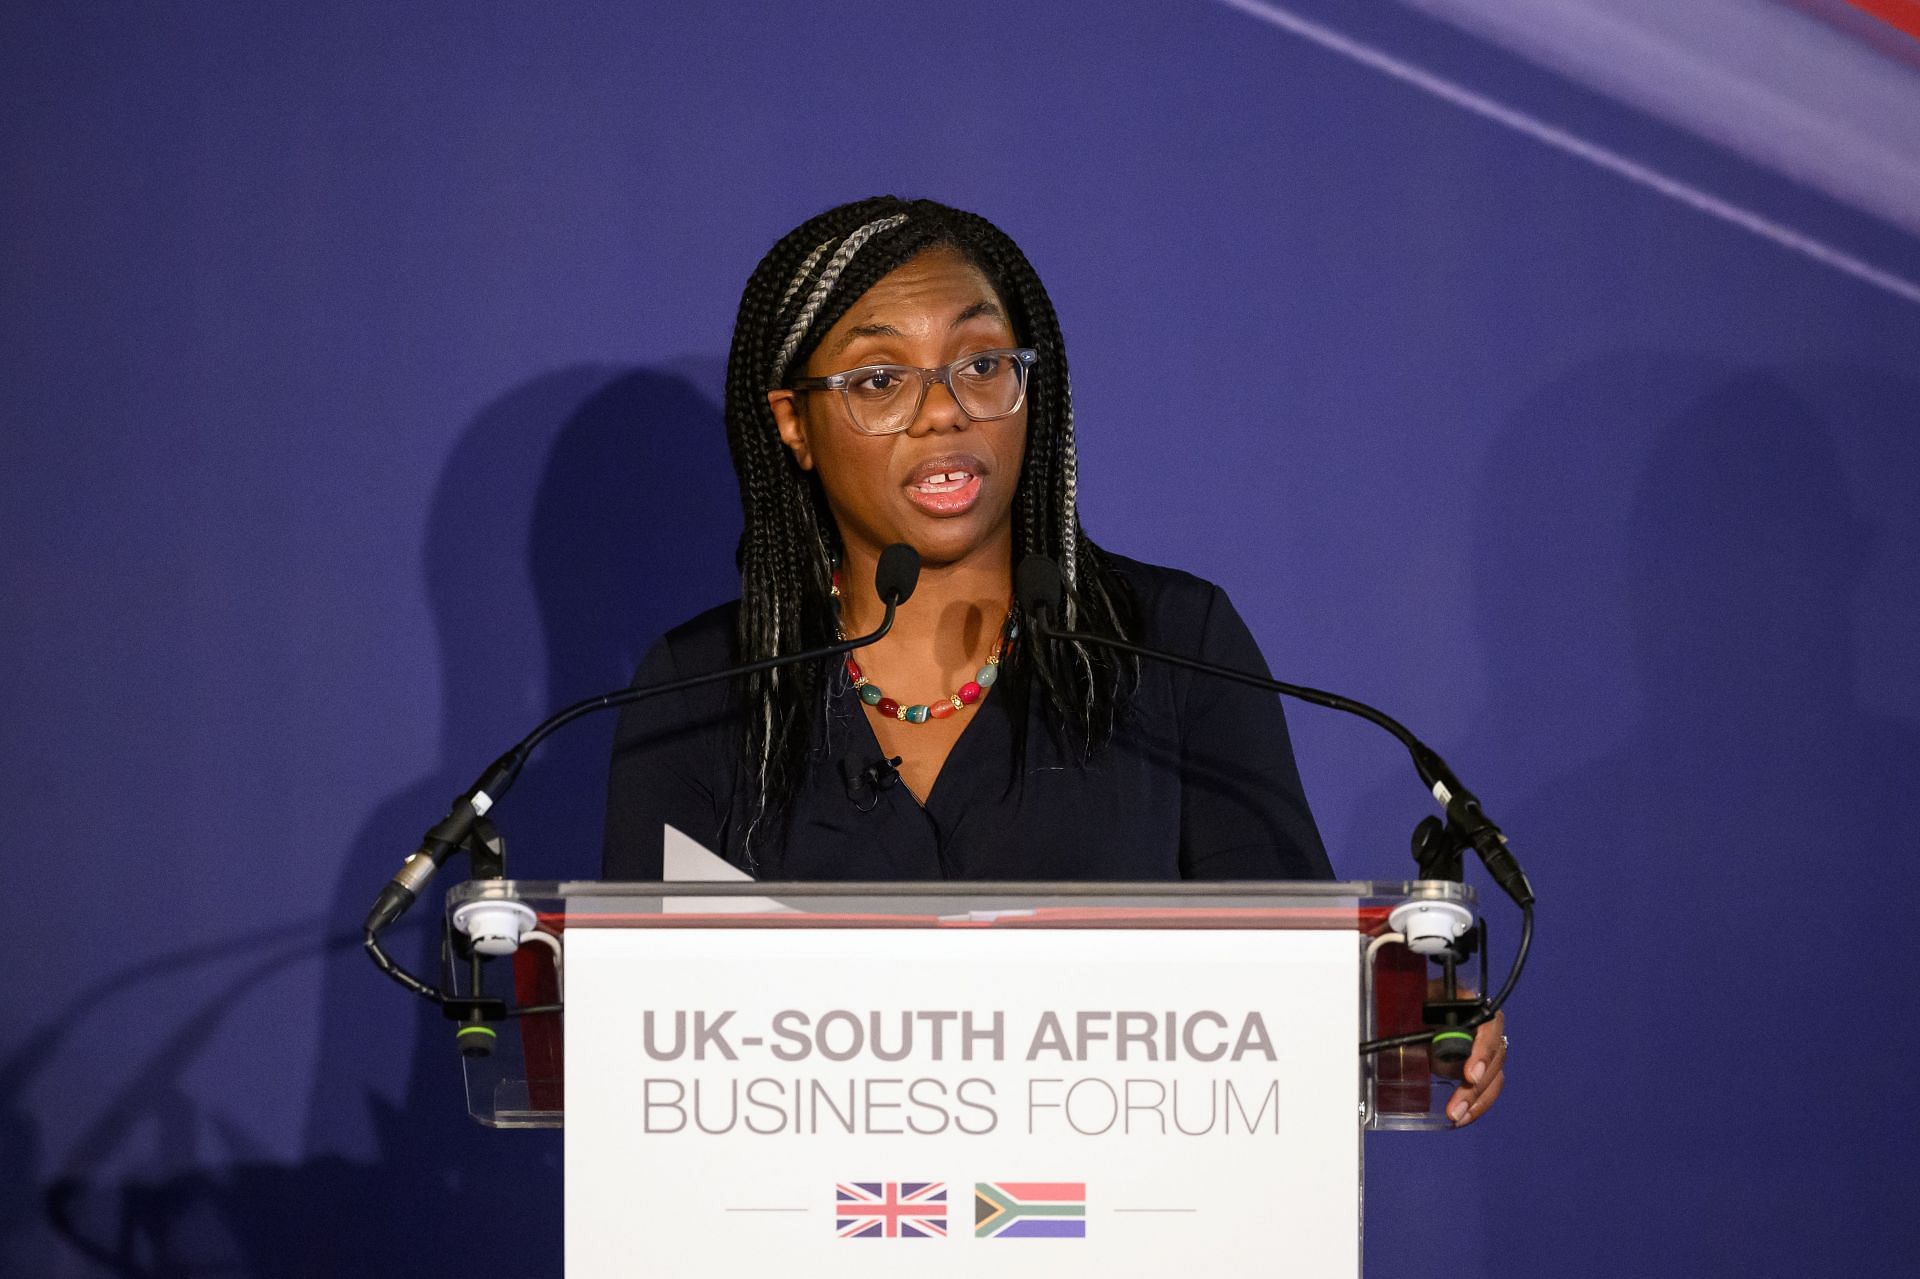 Kemi Badenoch speaking at the Business Forum at Lancaster House in 2022 in London (Image via Getty/Leon Neal)